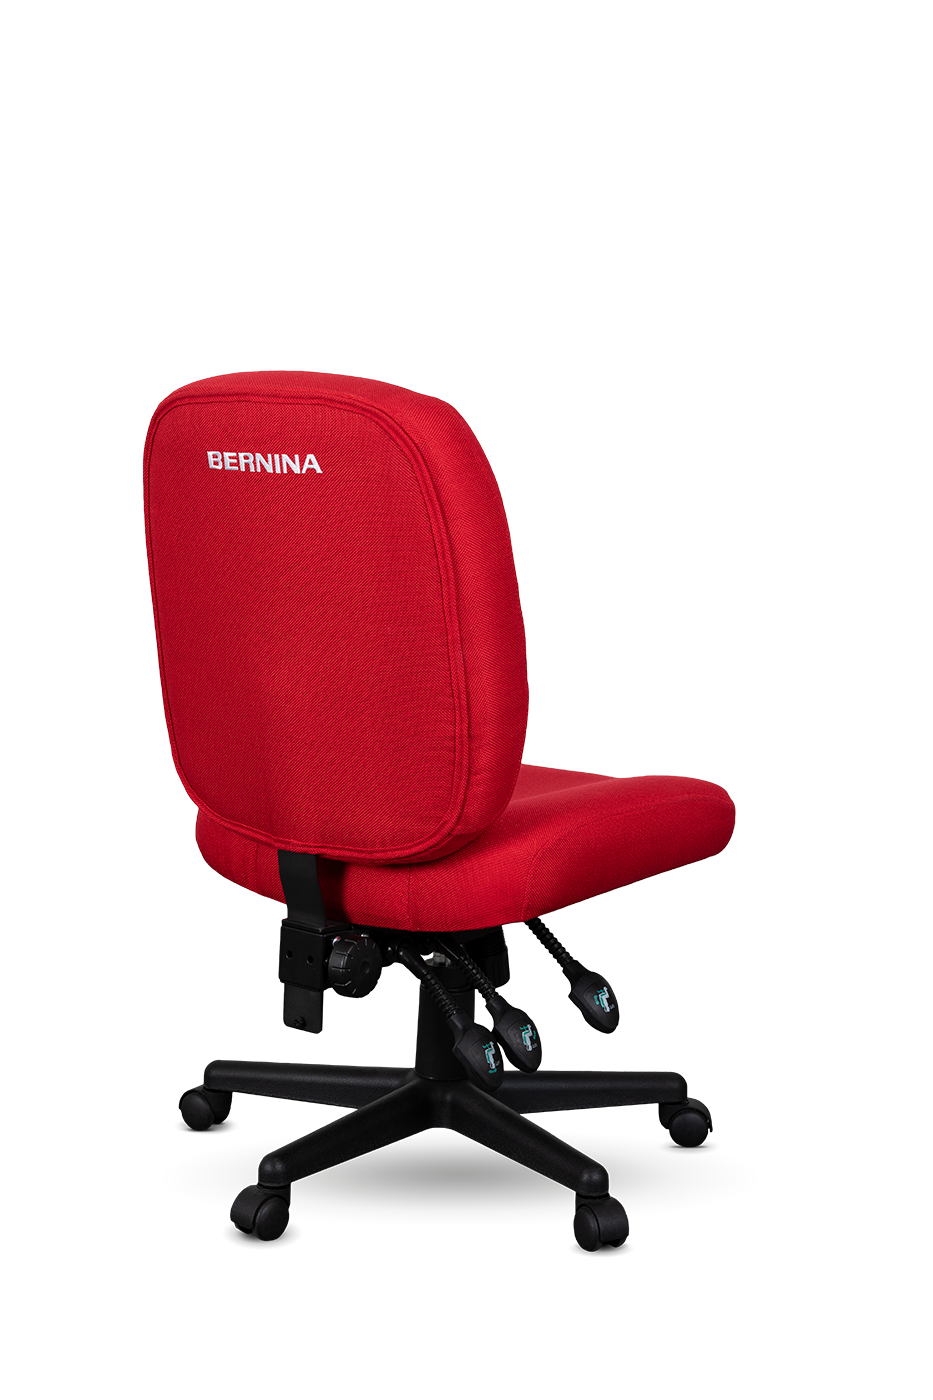 BERNINA Red Sewing Chair CH16090C for Sale at World Weidner